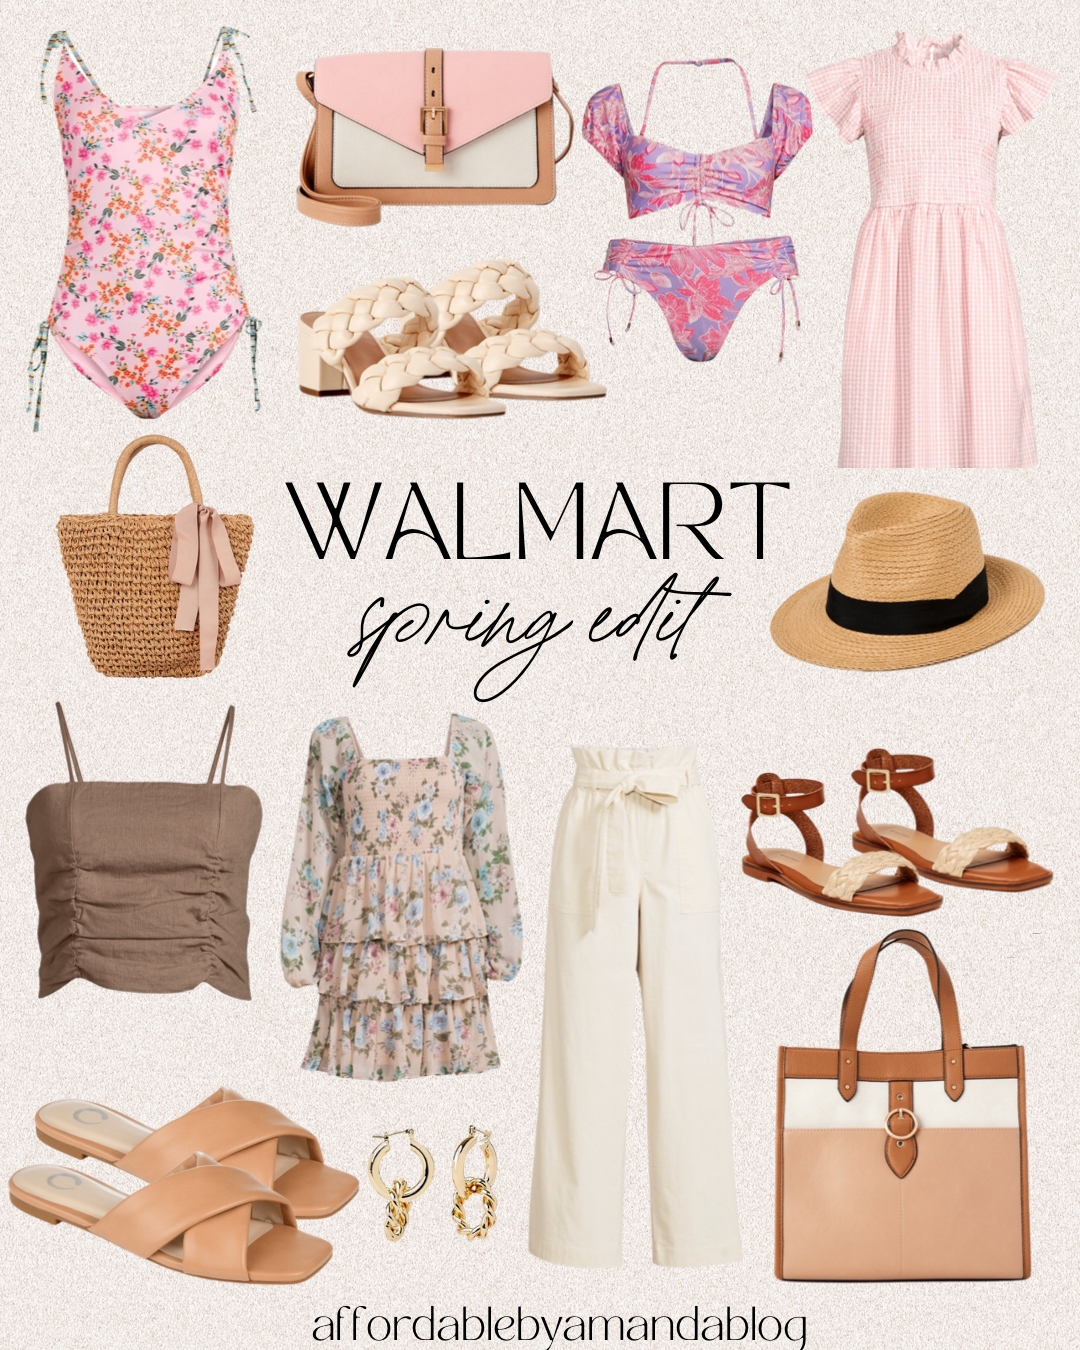 Umm, A Cute Spring Outfit from Wal-Mart?!?!?!